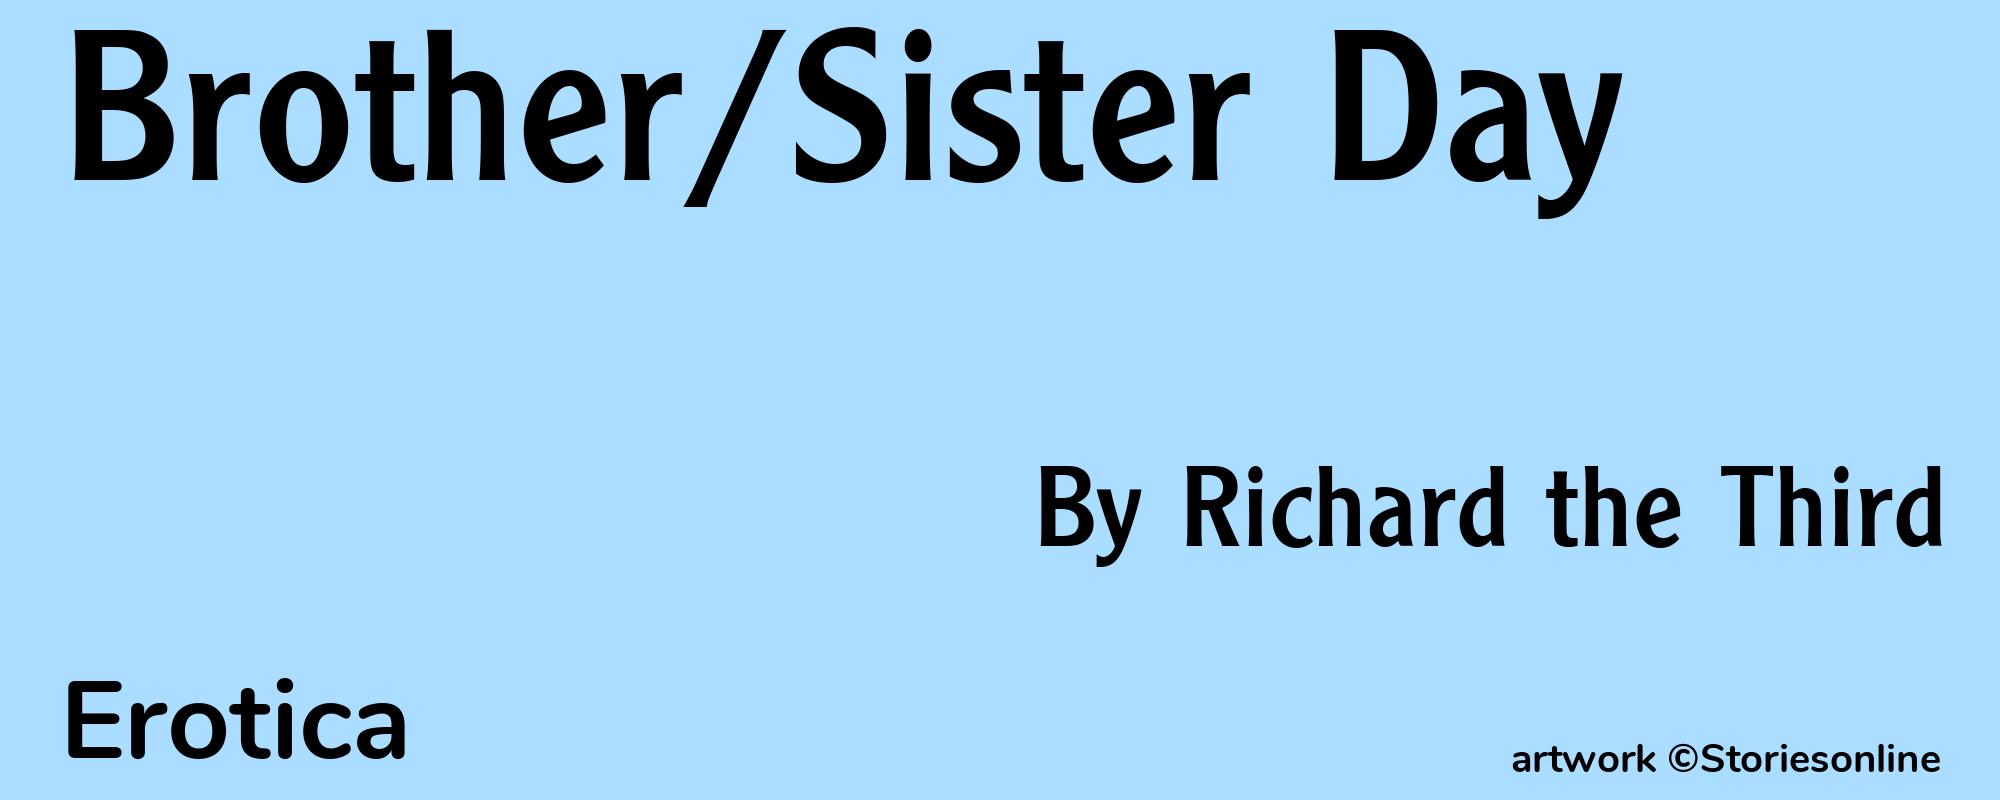 Brother/Sister Day - Cover